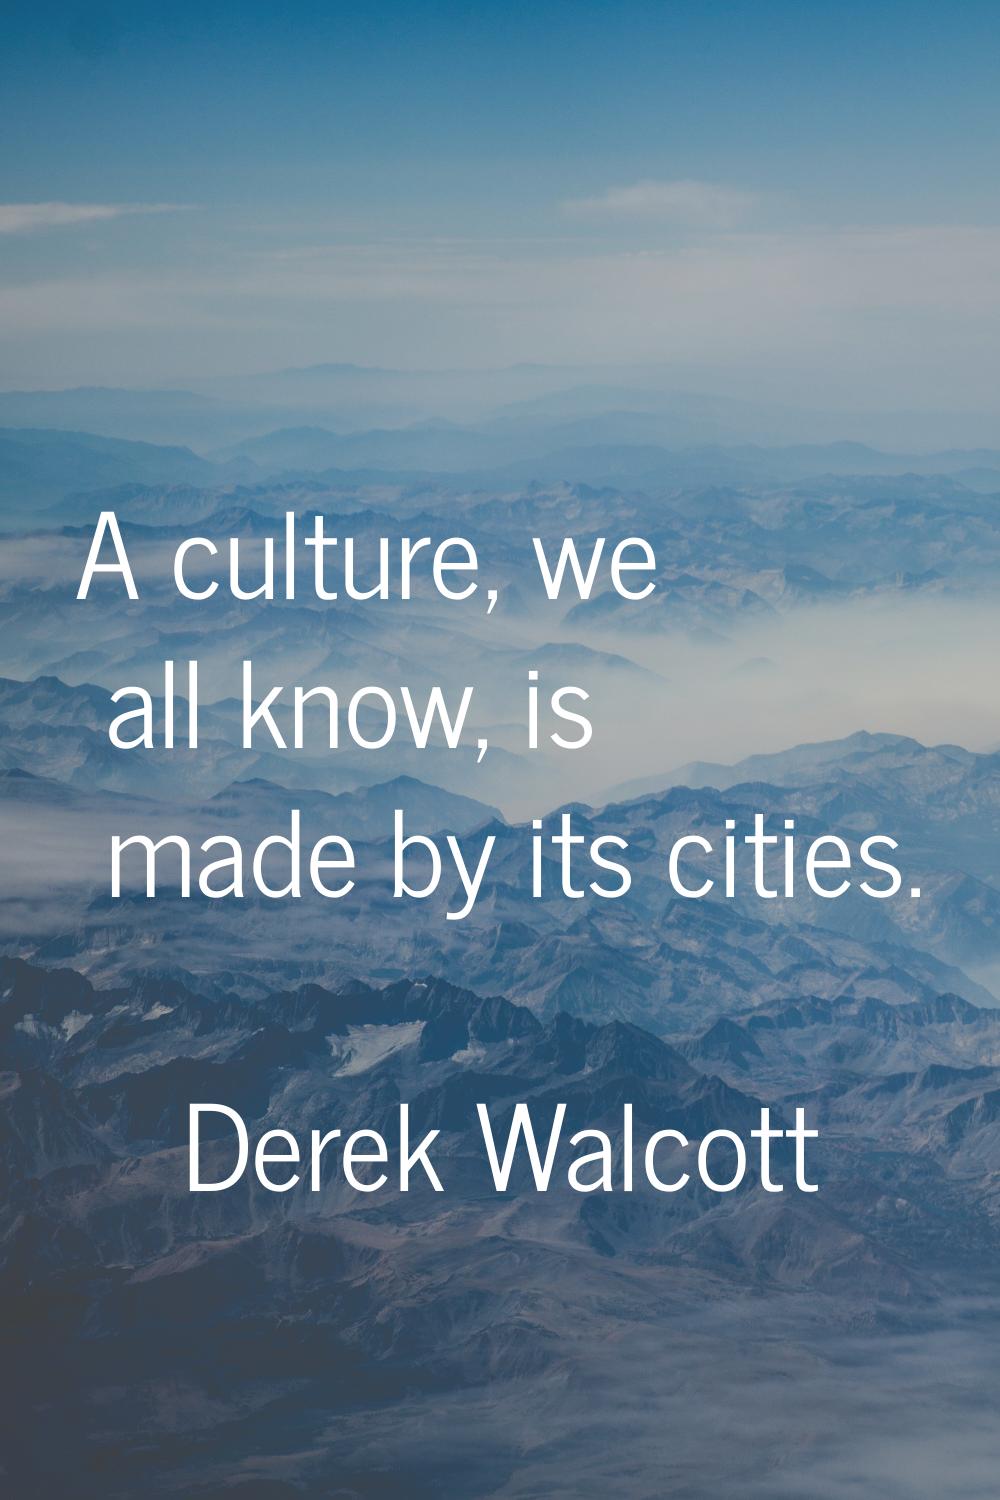 A culture, we all know, is made by its cities.